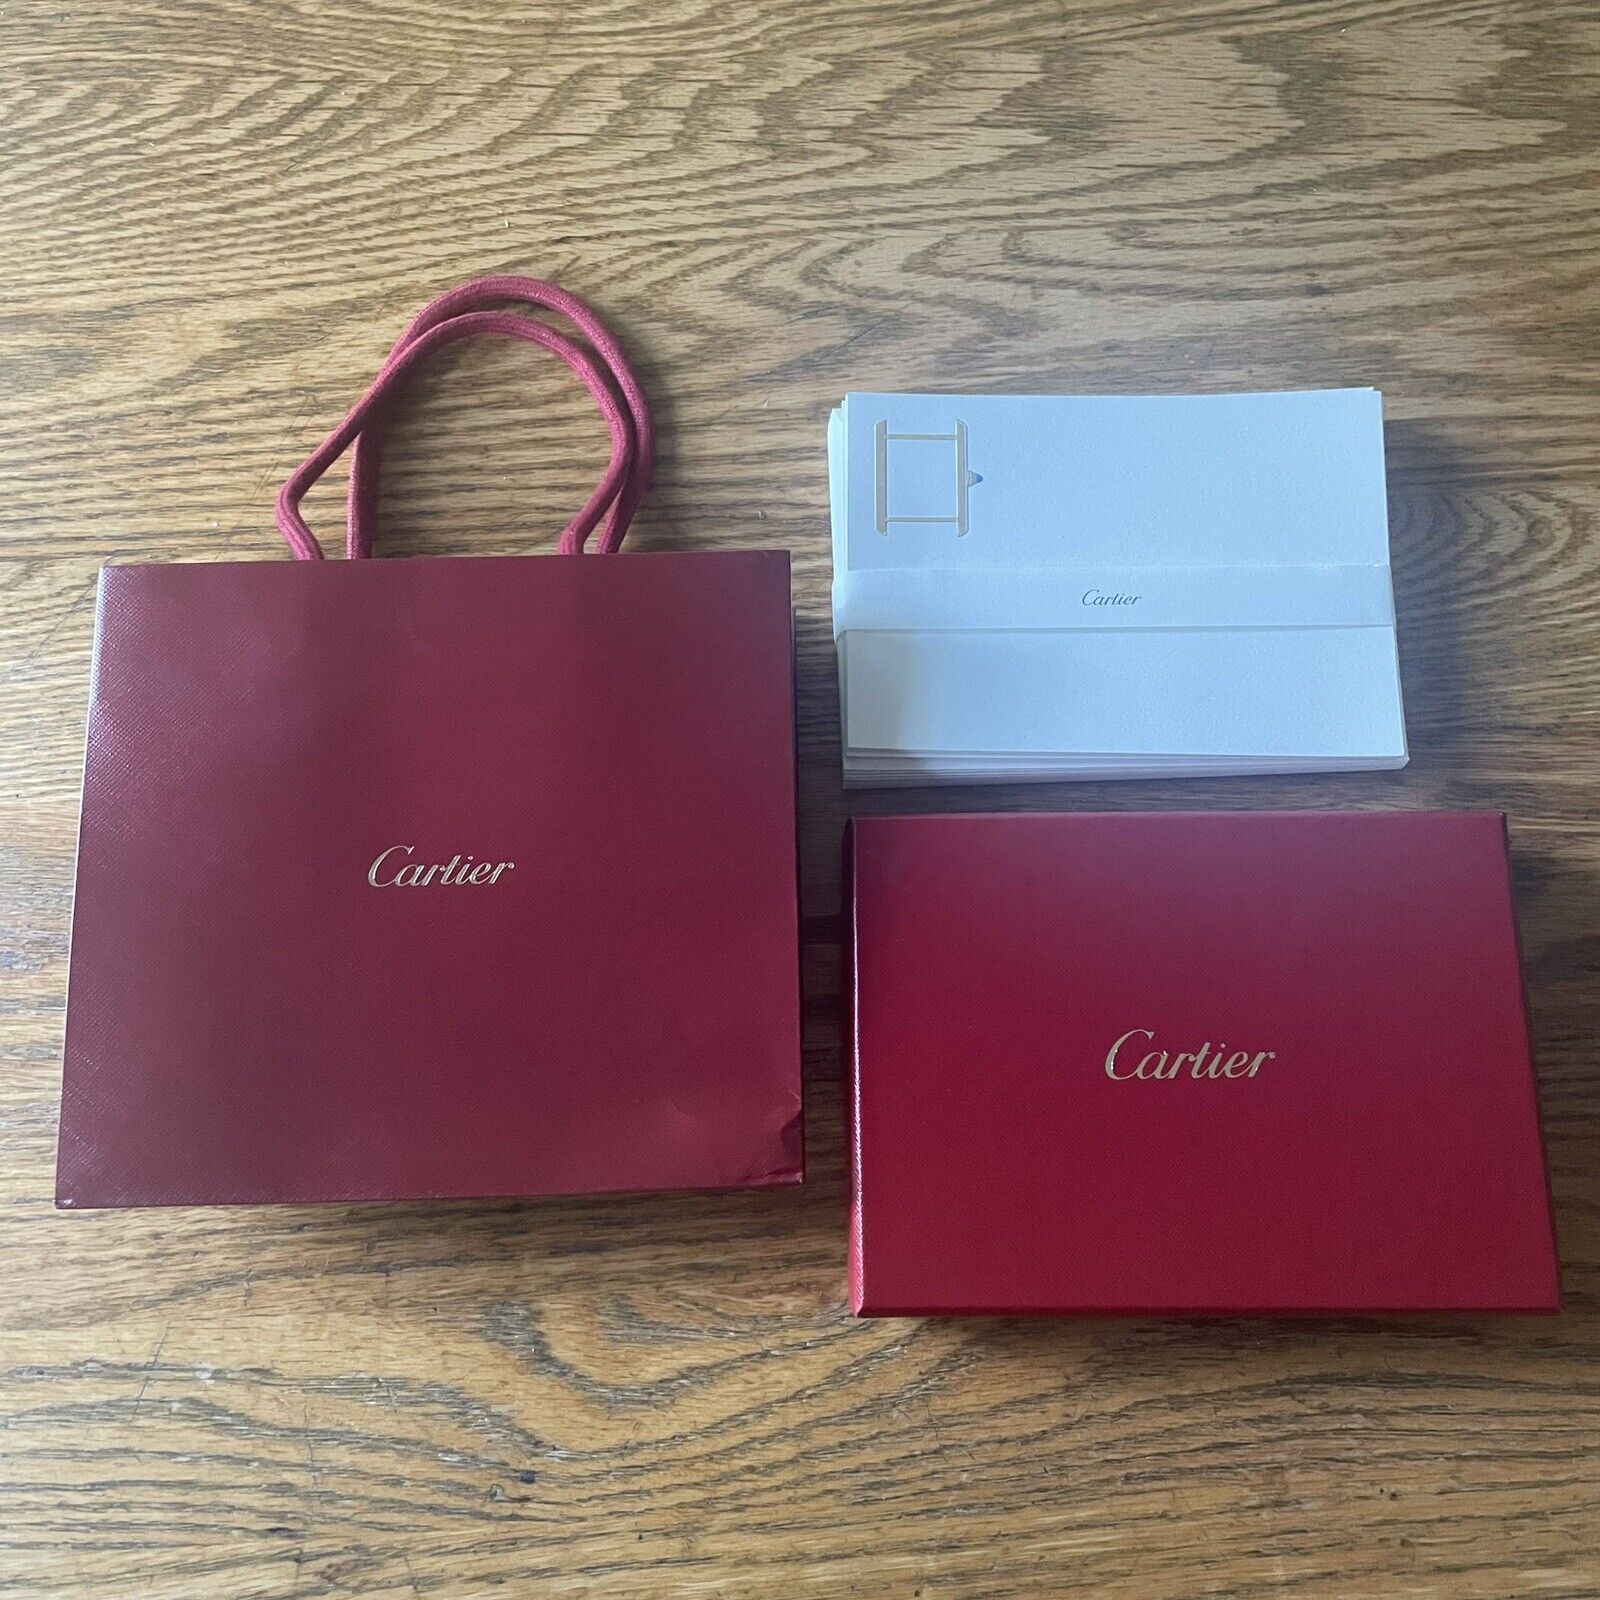 Cartier Box Stationary Watch Profile 9 Cards Envelopes And Bag Authentic